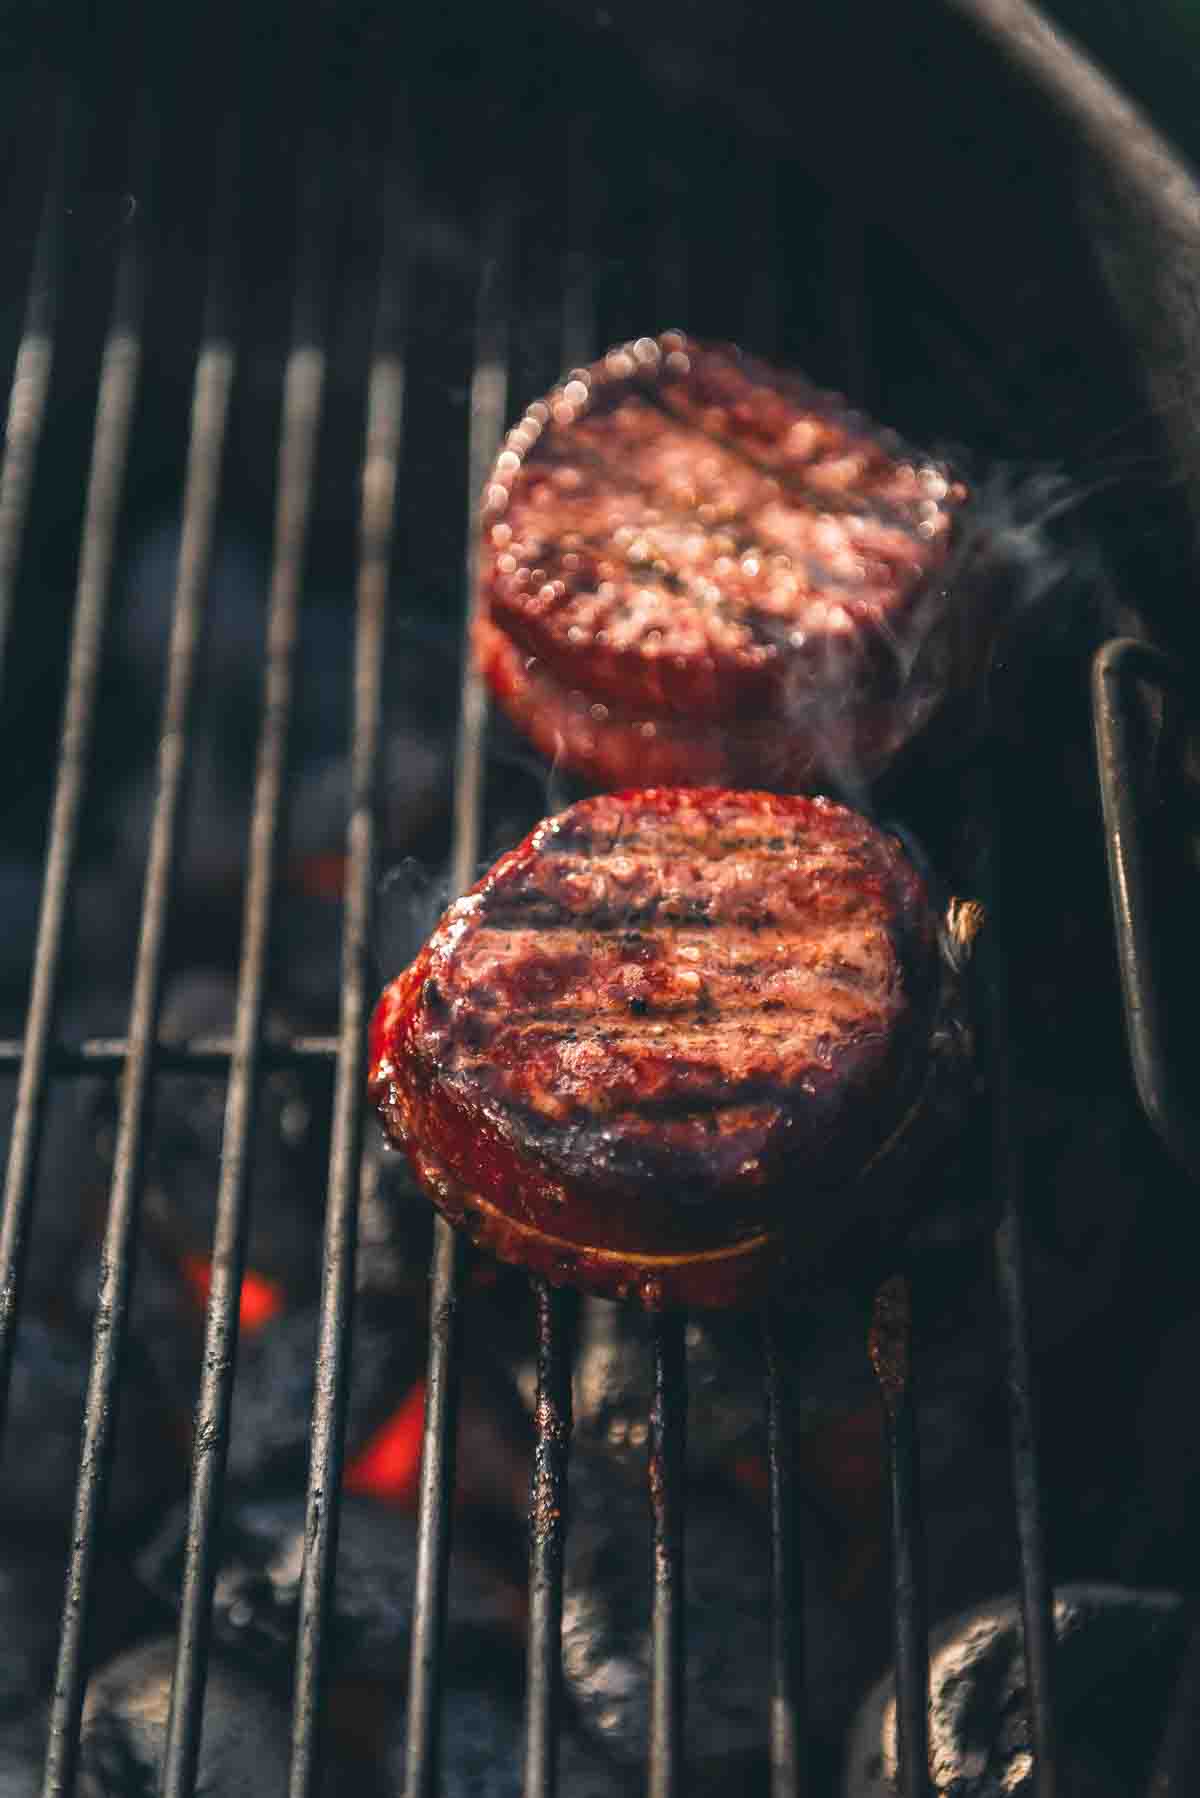 Charcoal-Grilled Filets Mignons